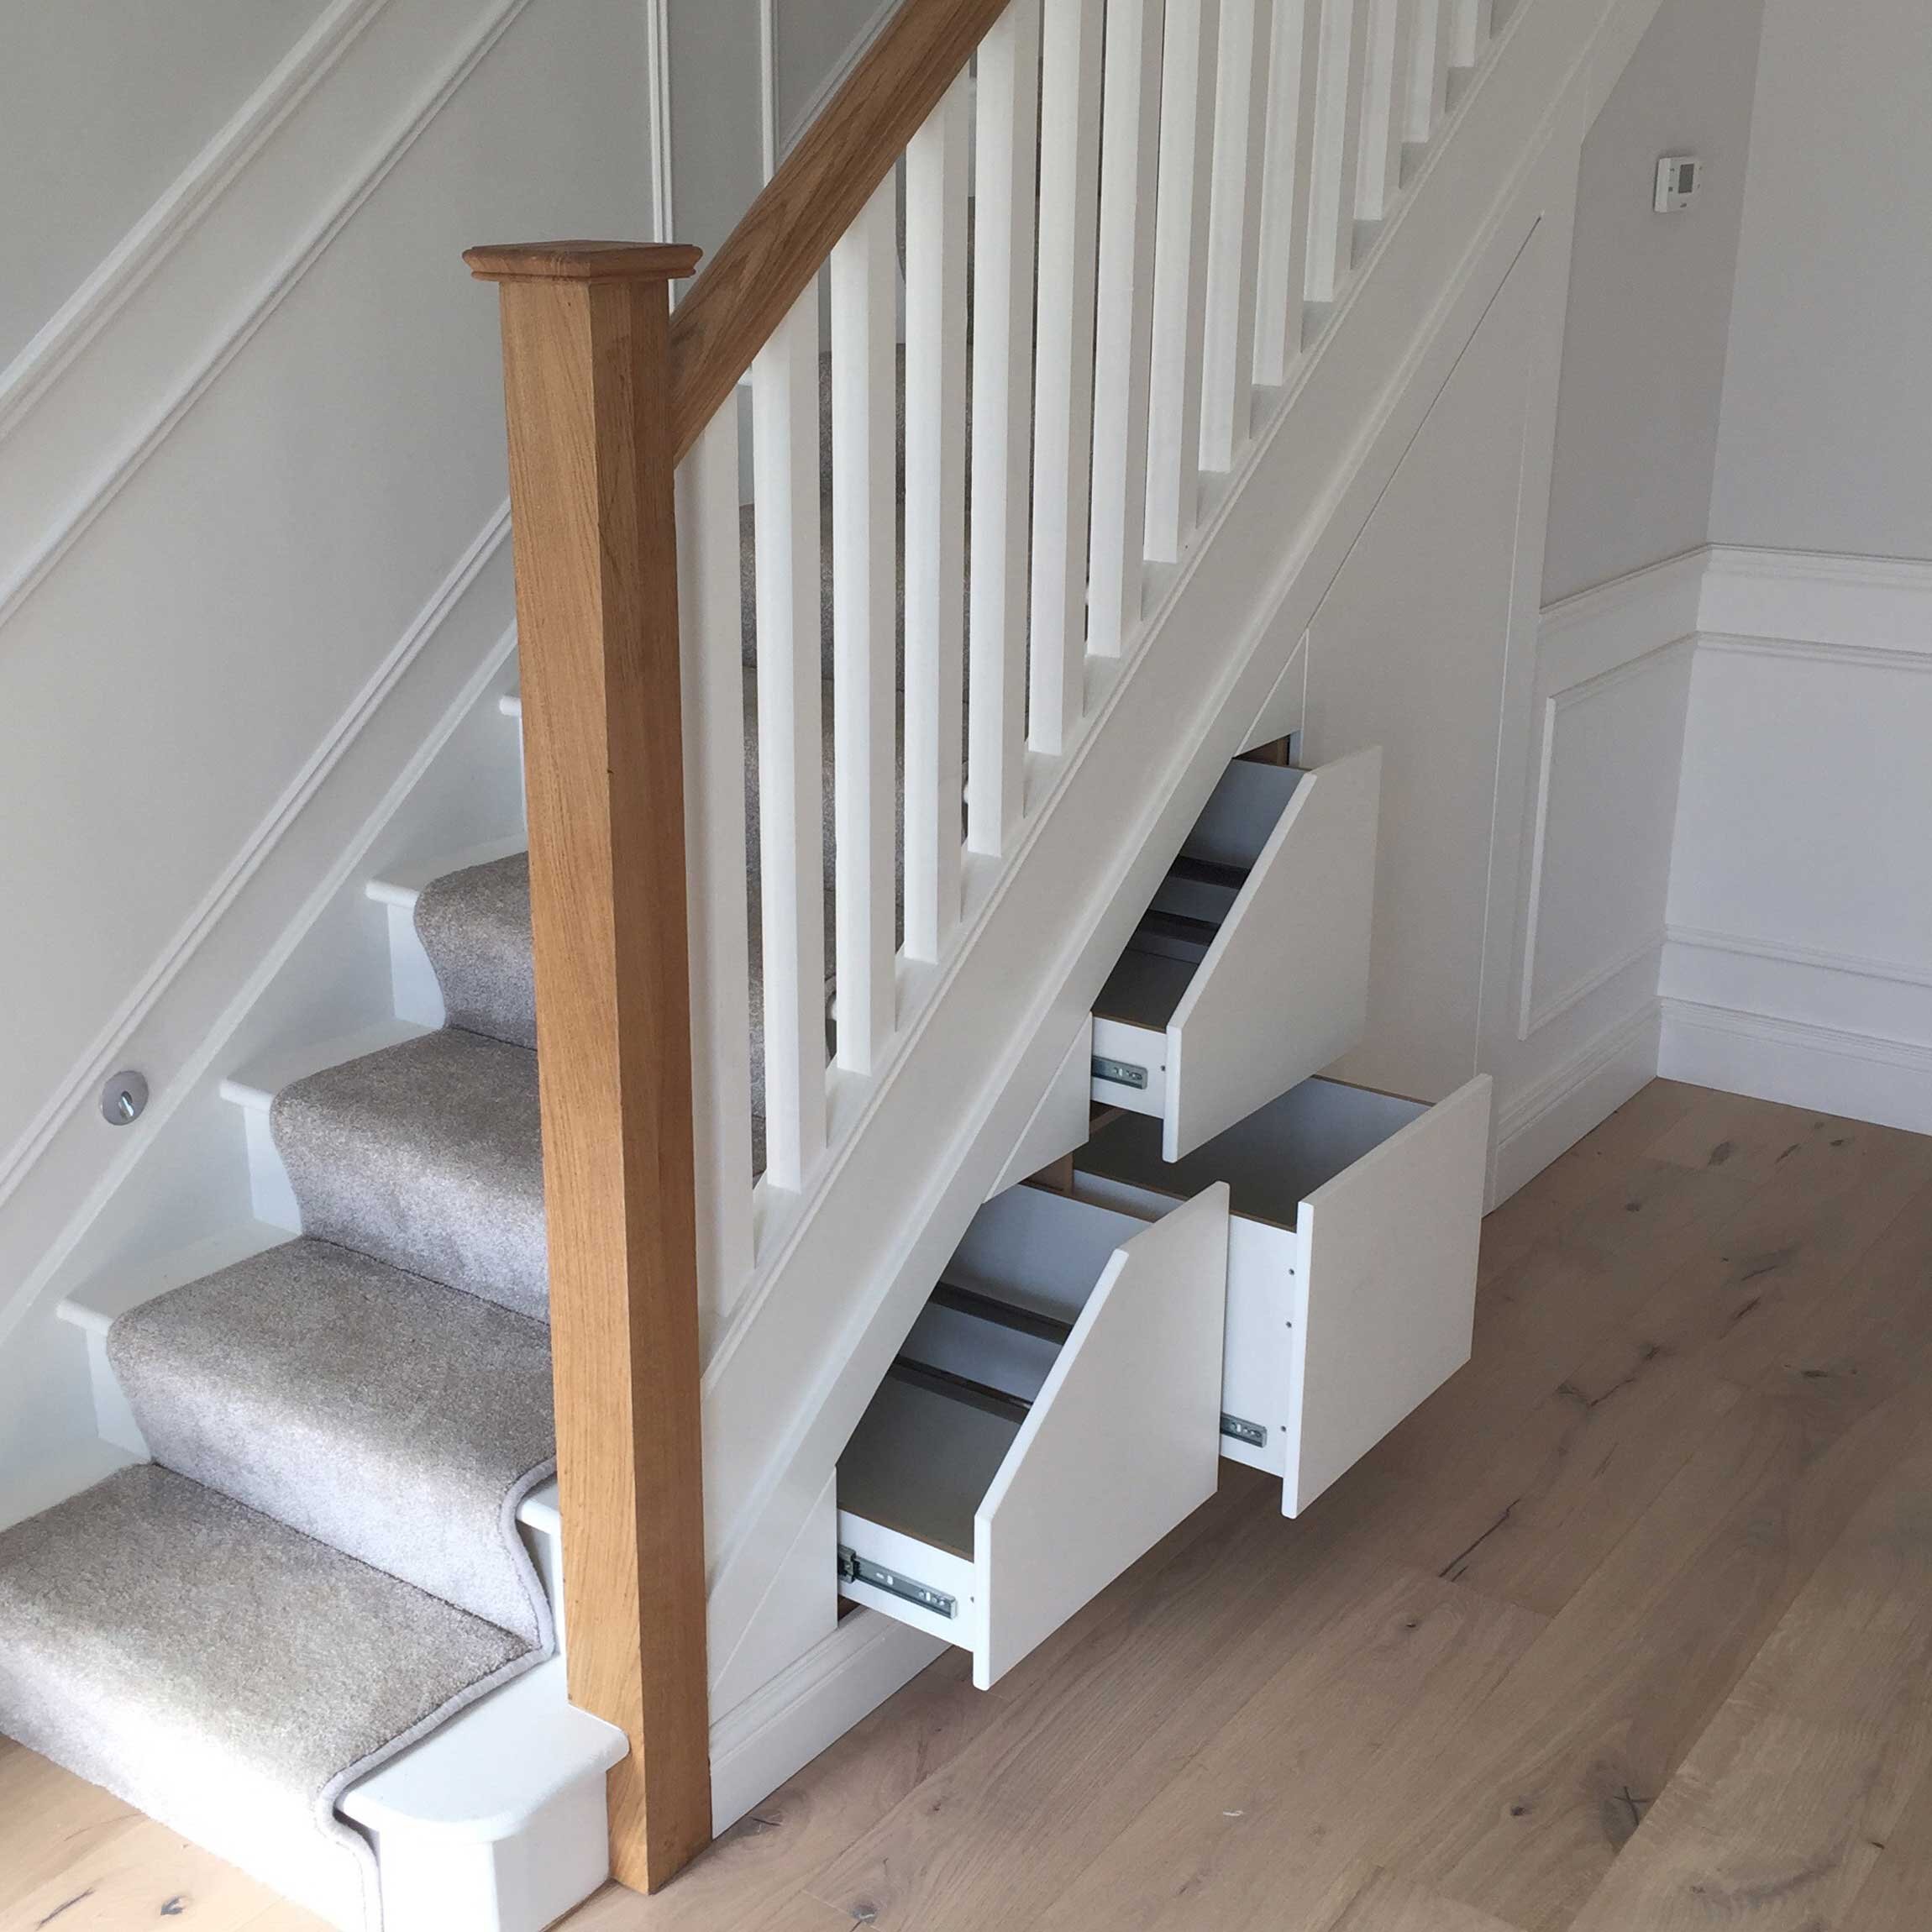 Pull out drawer storage - Image: Staircase storage